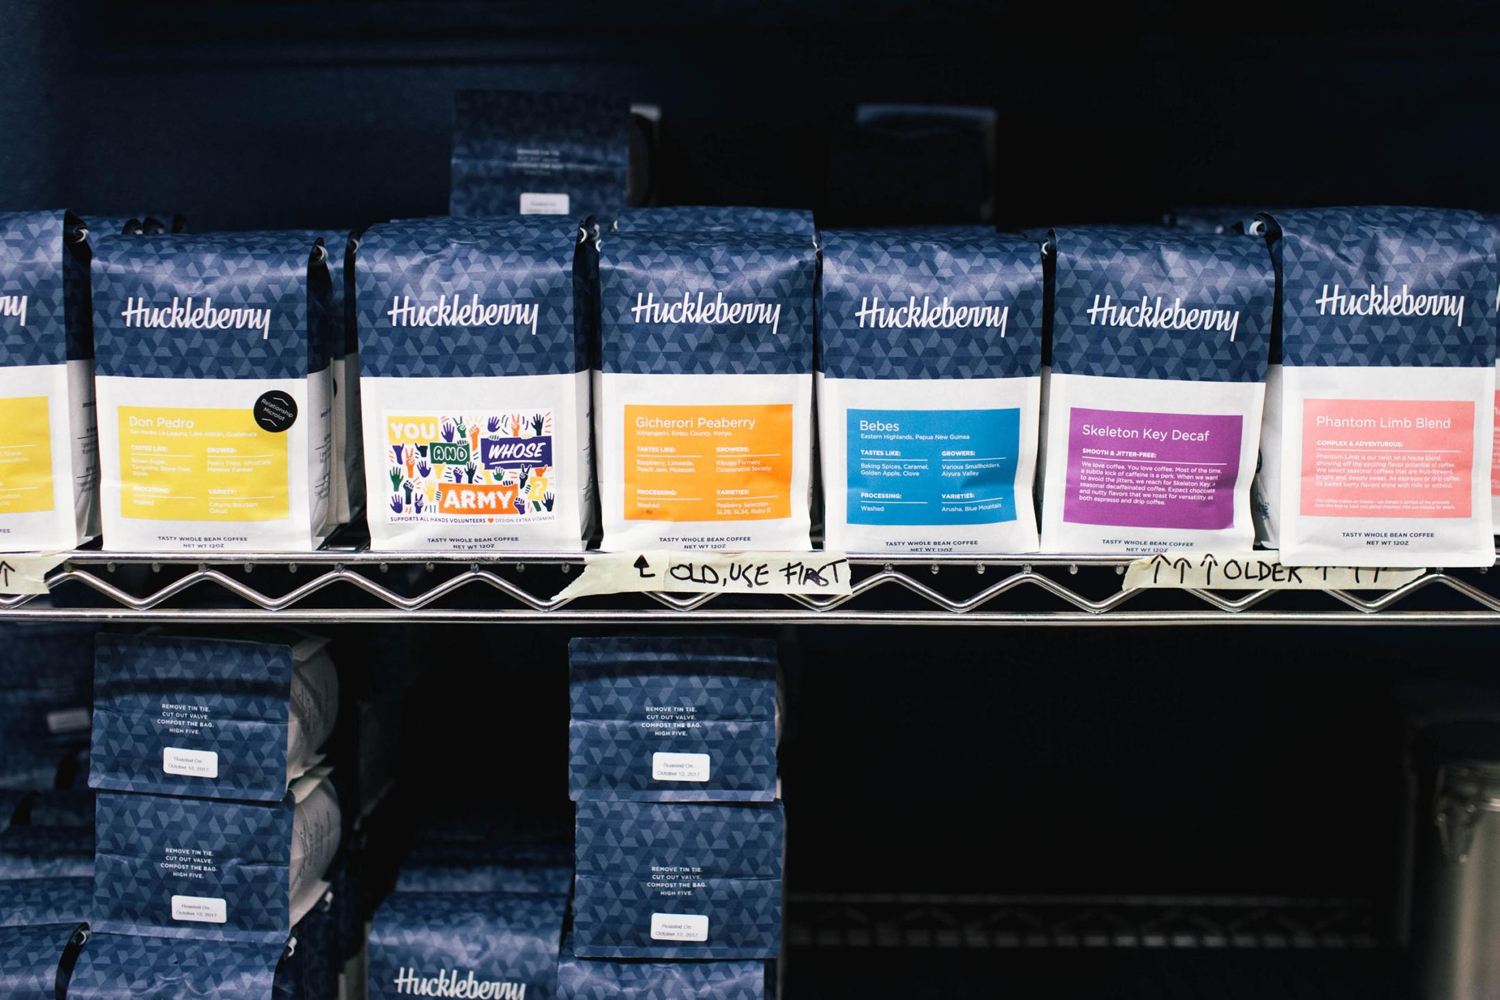 New packaging for Colorado coffee roaster Huckleberry by Mast